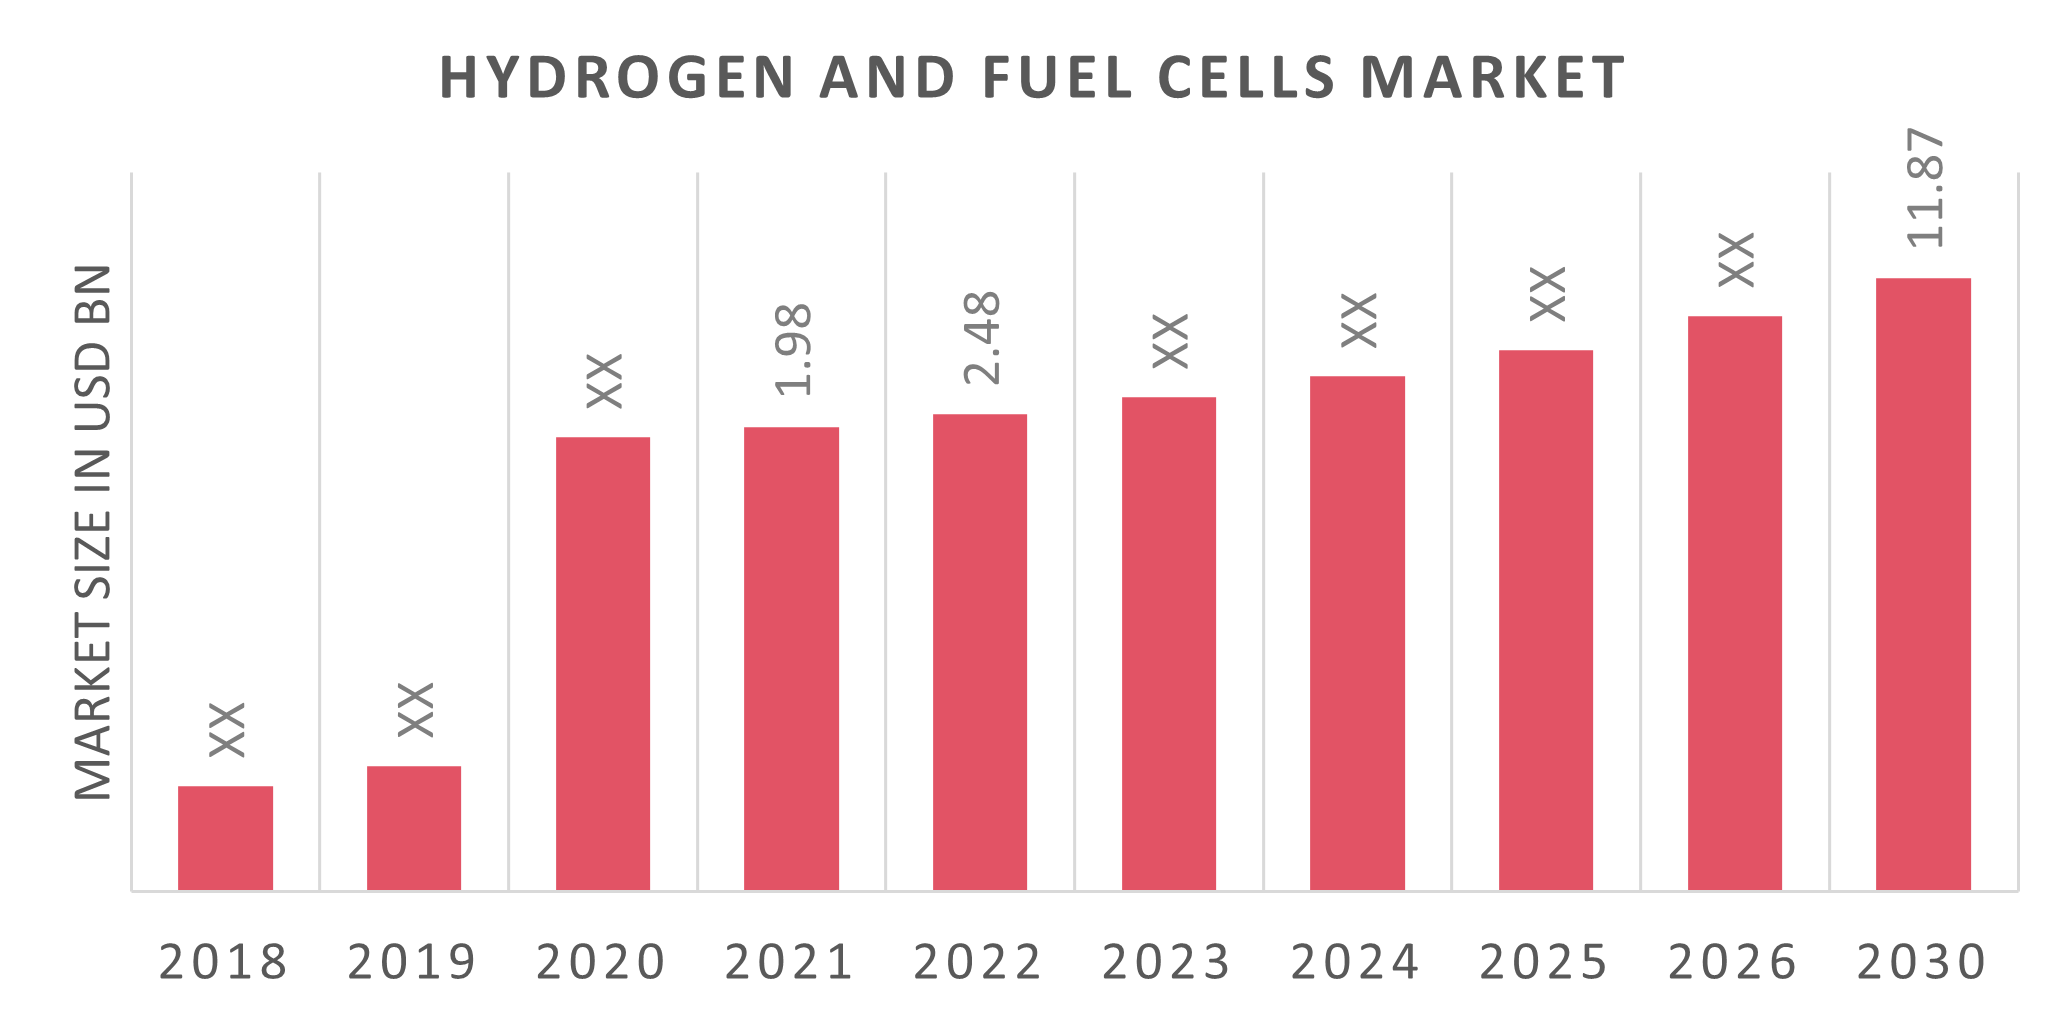 Hydrogen Fuel Cell Market Size, Share, Trends Report 2030 Industry Growth Analysis